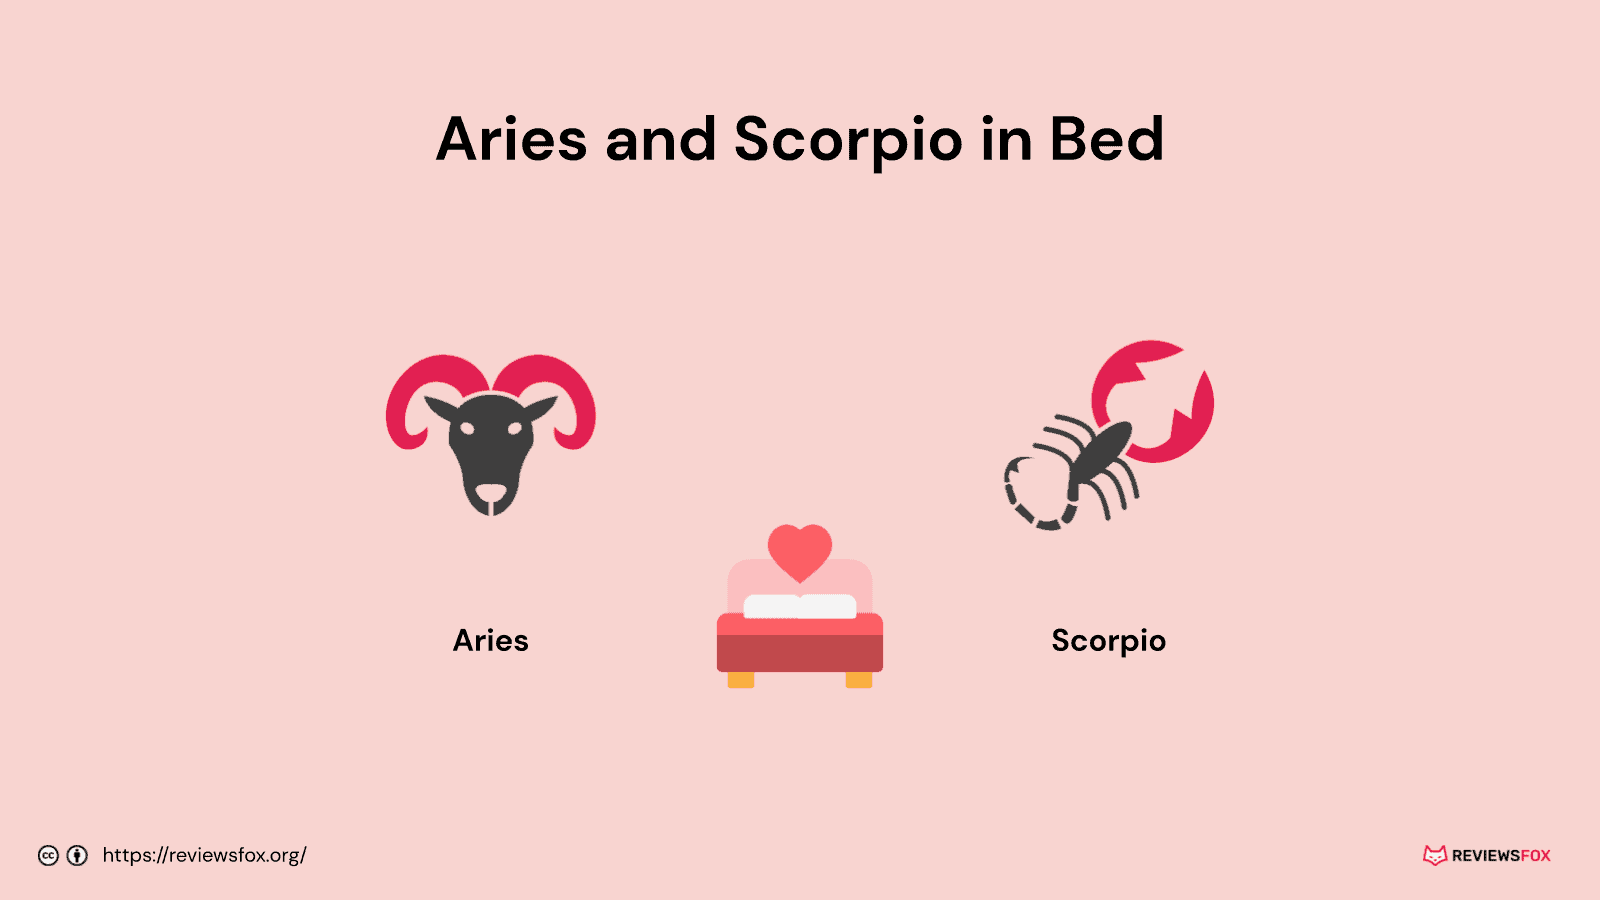 Aries and Scorpio in bed